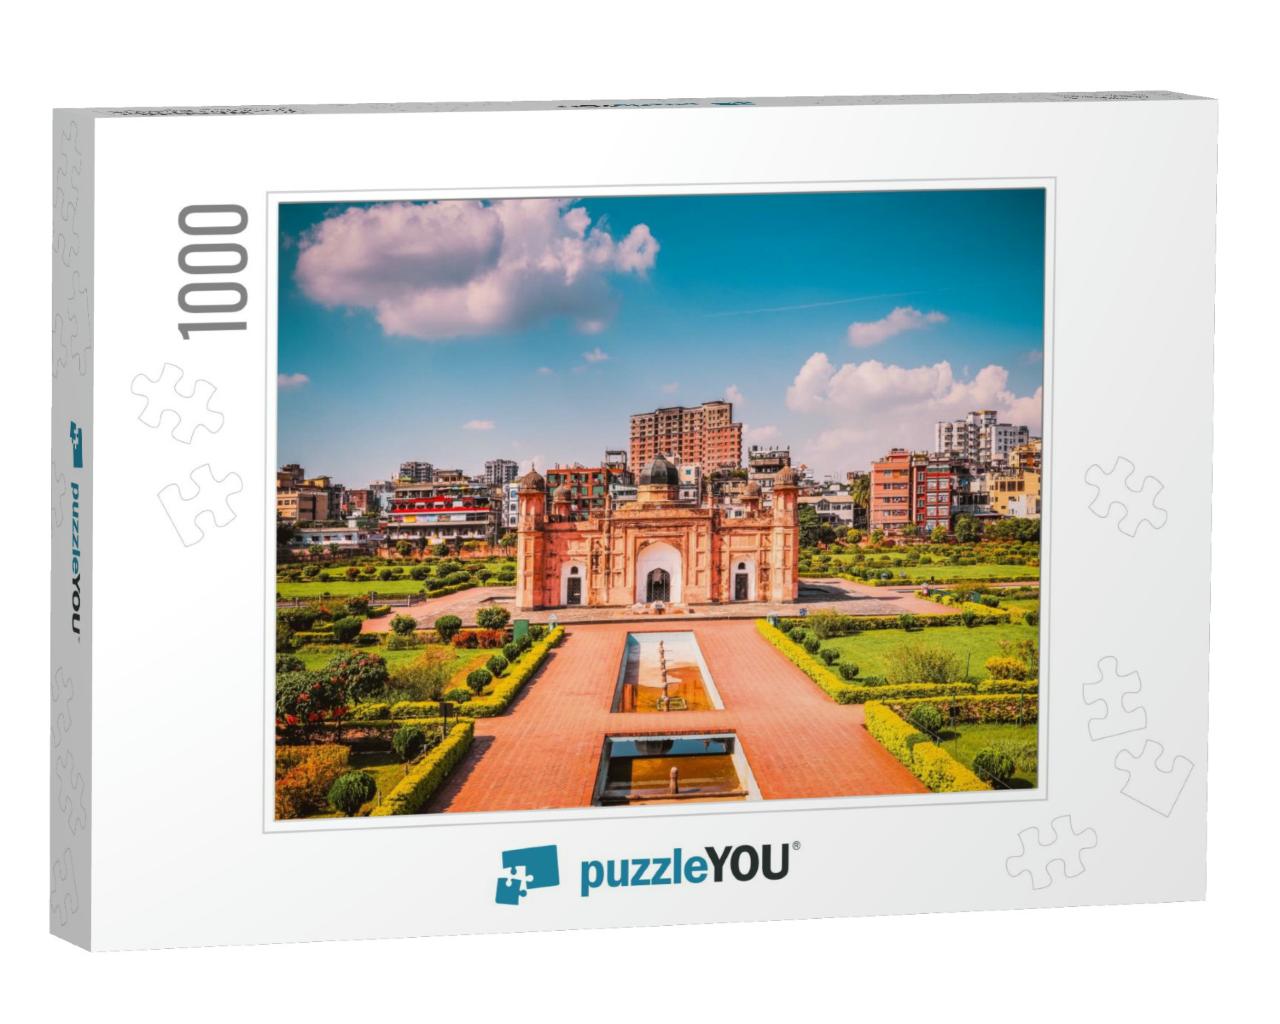 Lalbagh Fort, Mausoleum of Bibipari in Dhaka, Bangladesh... Jigsaw Puzzle with 1000 pieces